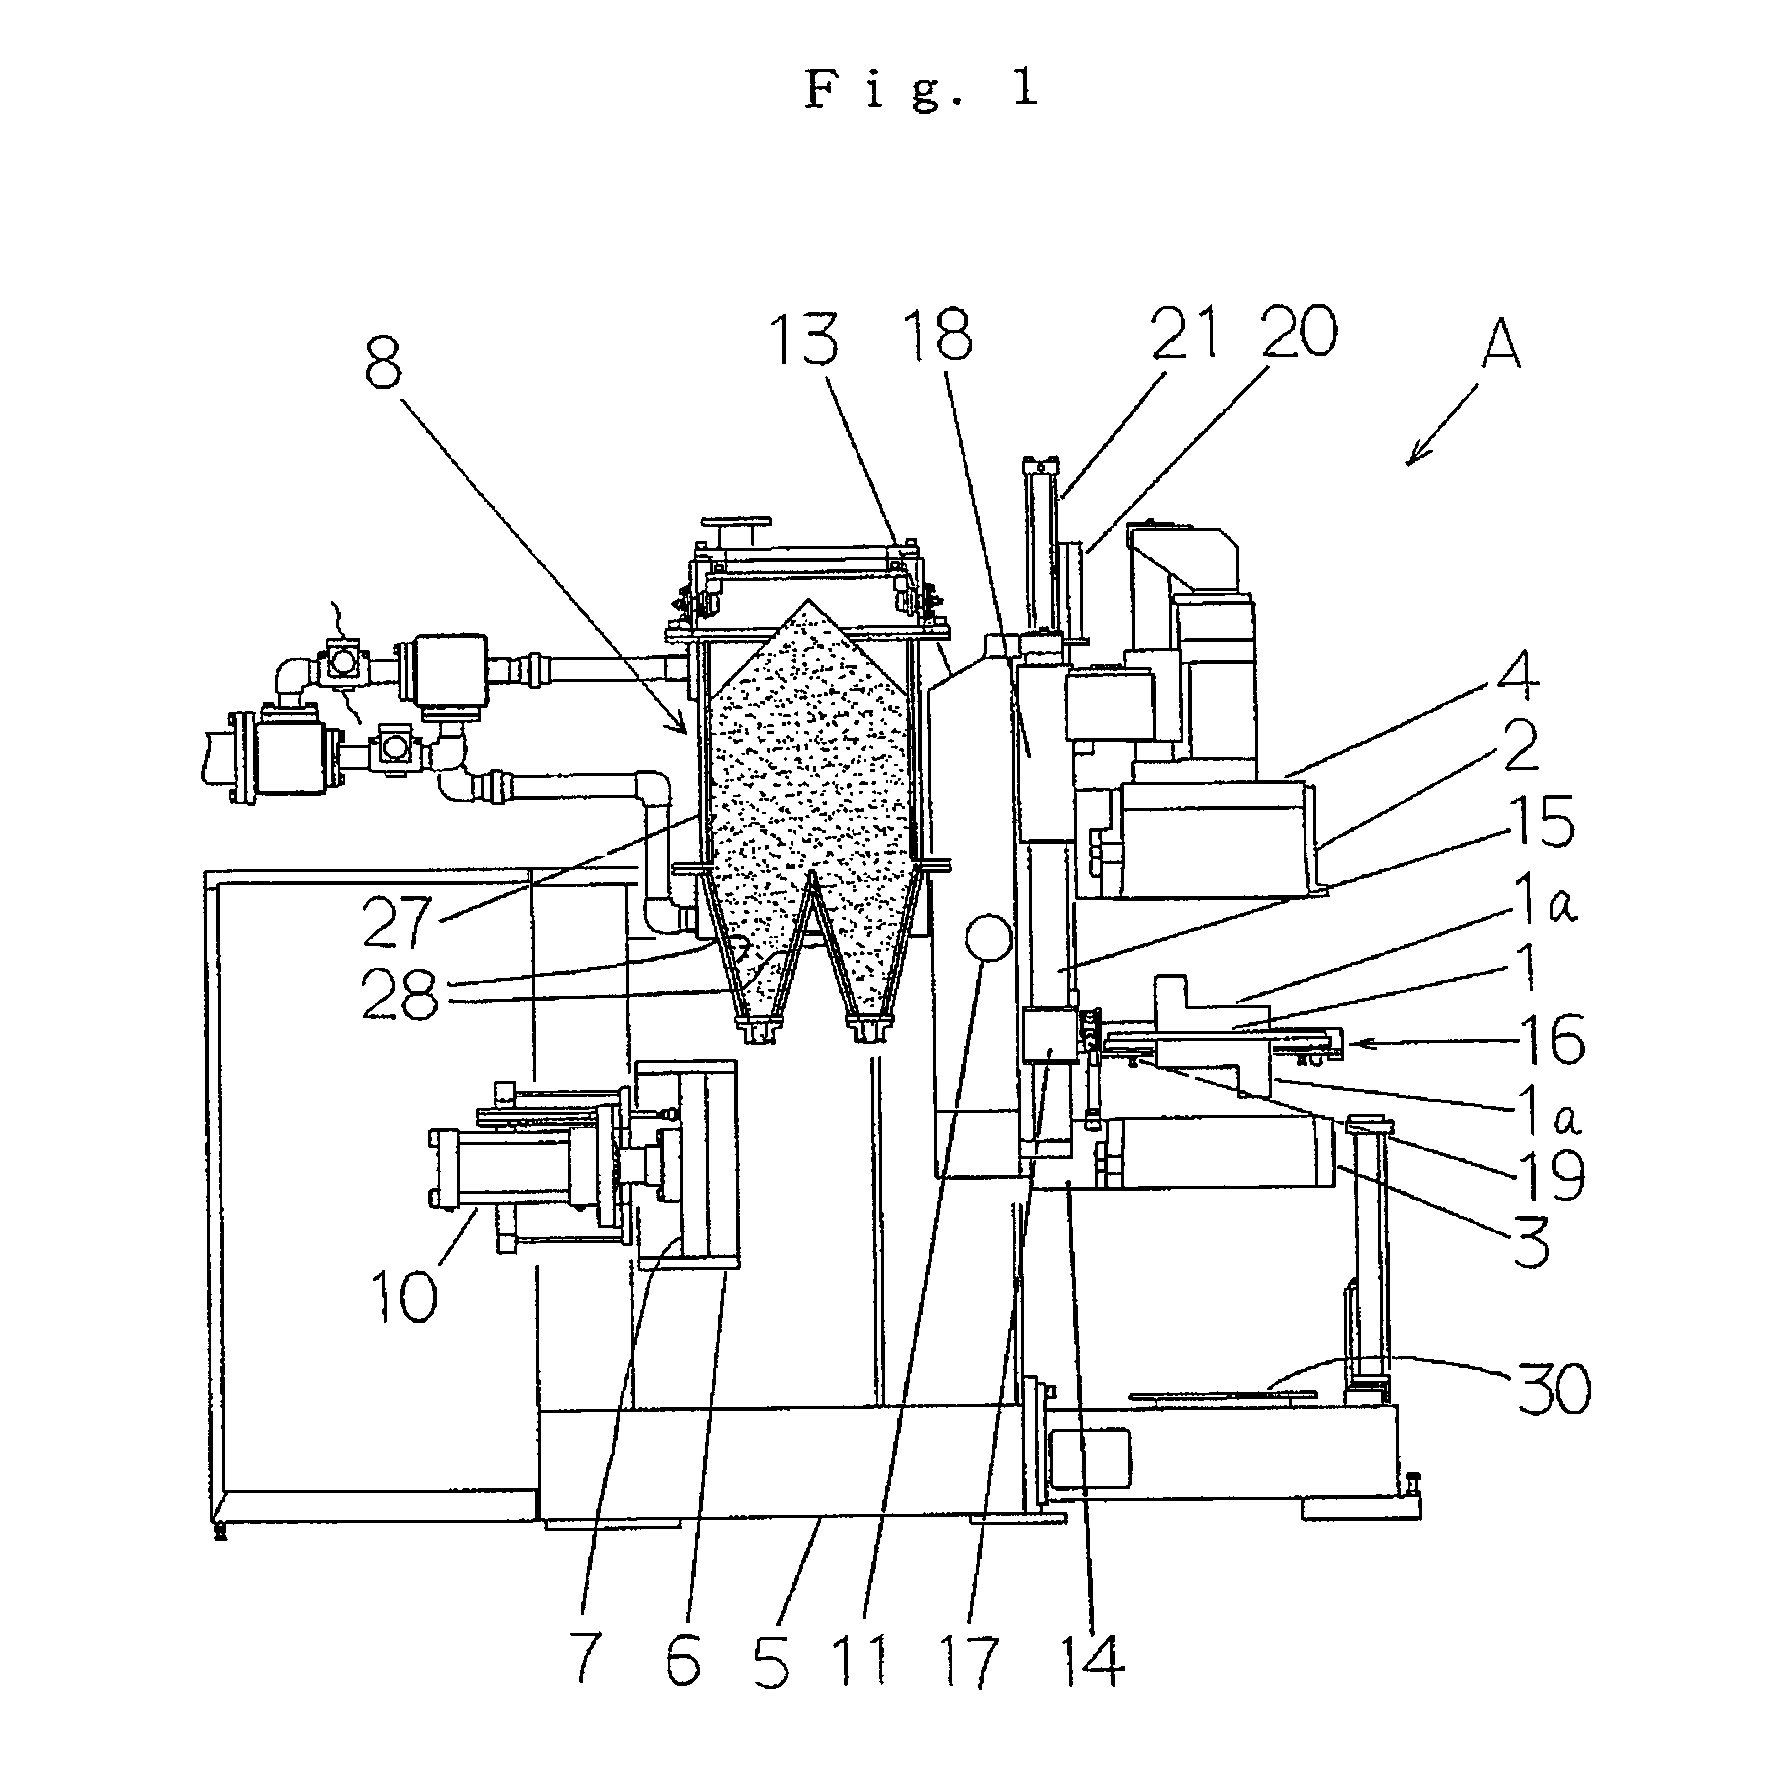 Core-setting apparatus used for a molding apparatus and a method for setting a core